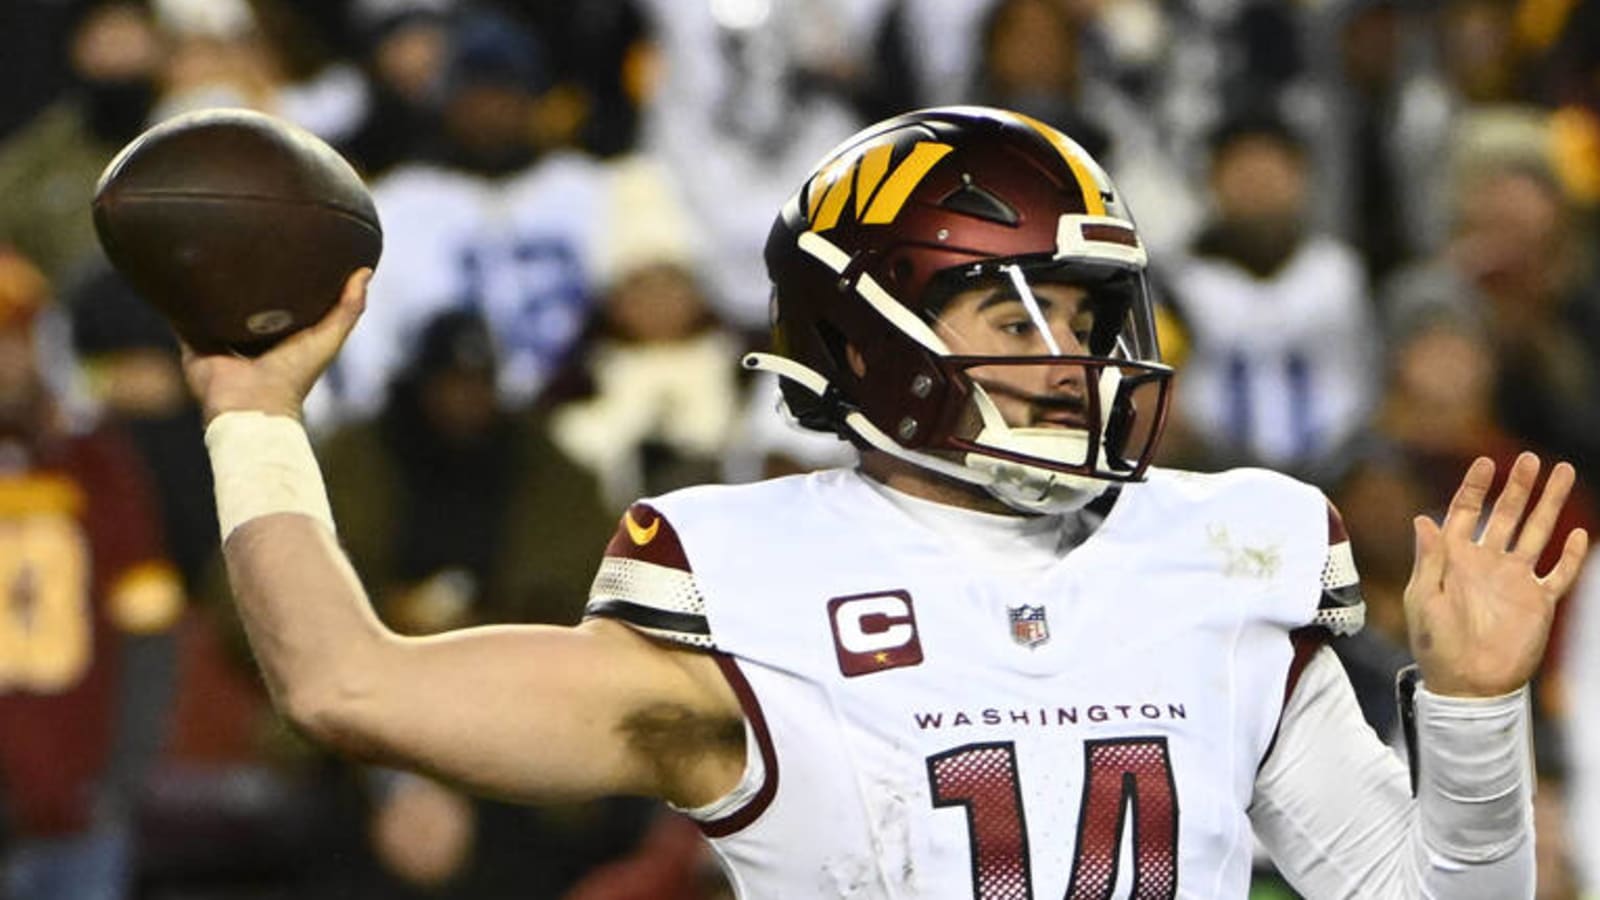 Untangling the messy QB situation in Washington